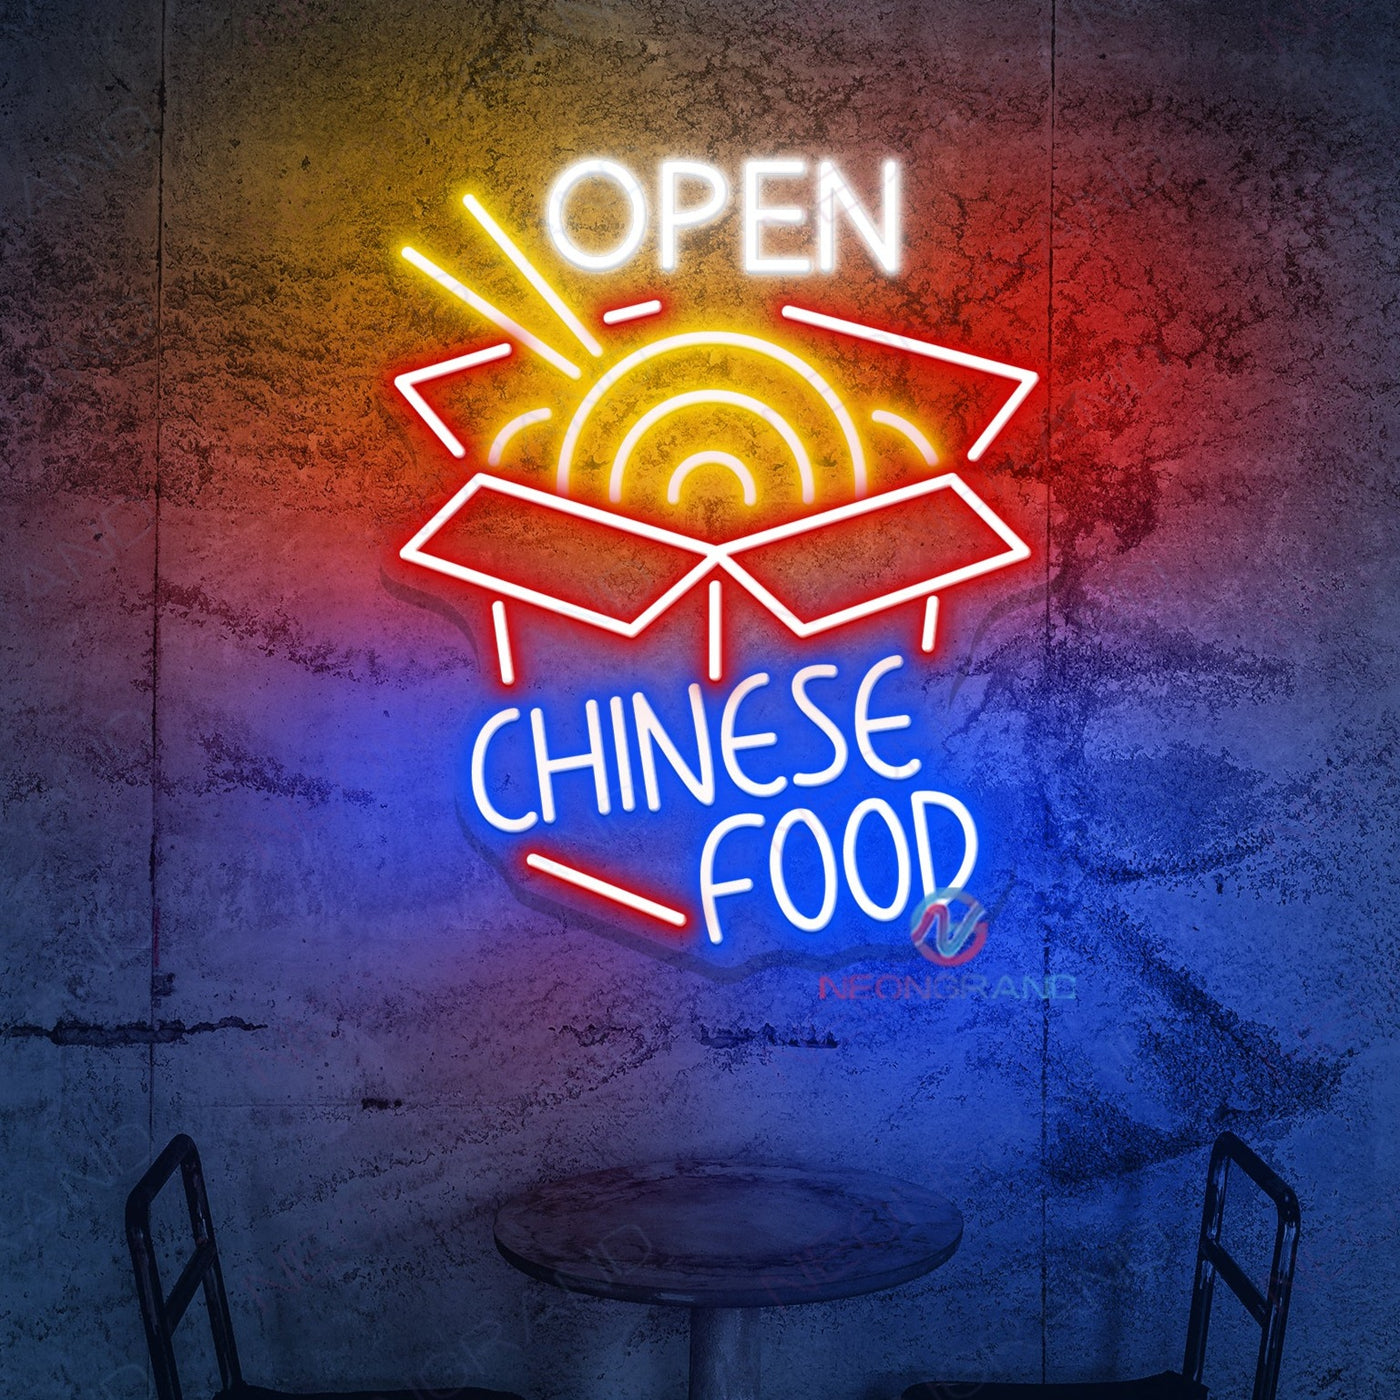 Chinese Food Open Neon Sign Restaurant Led Light